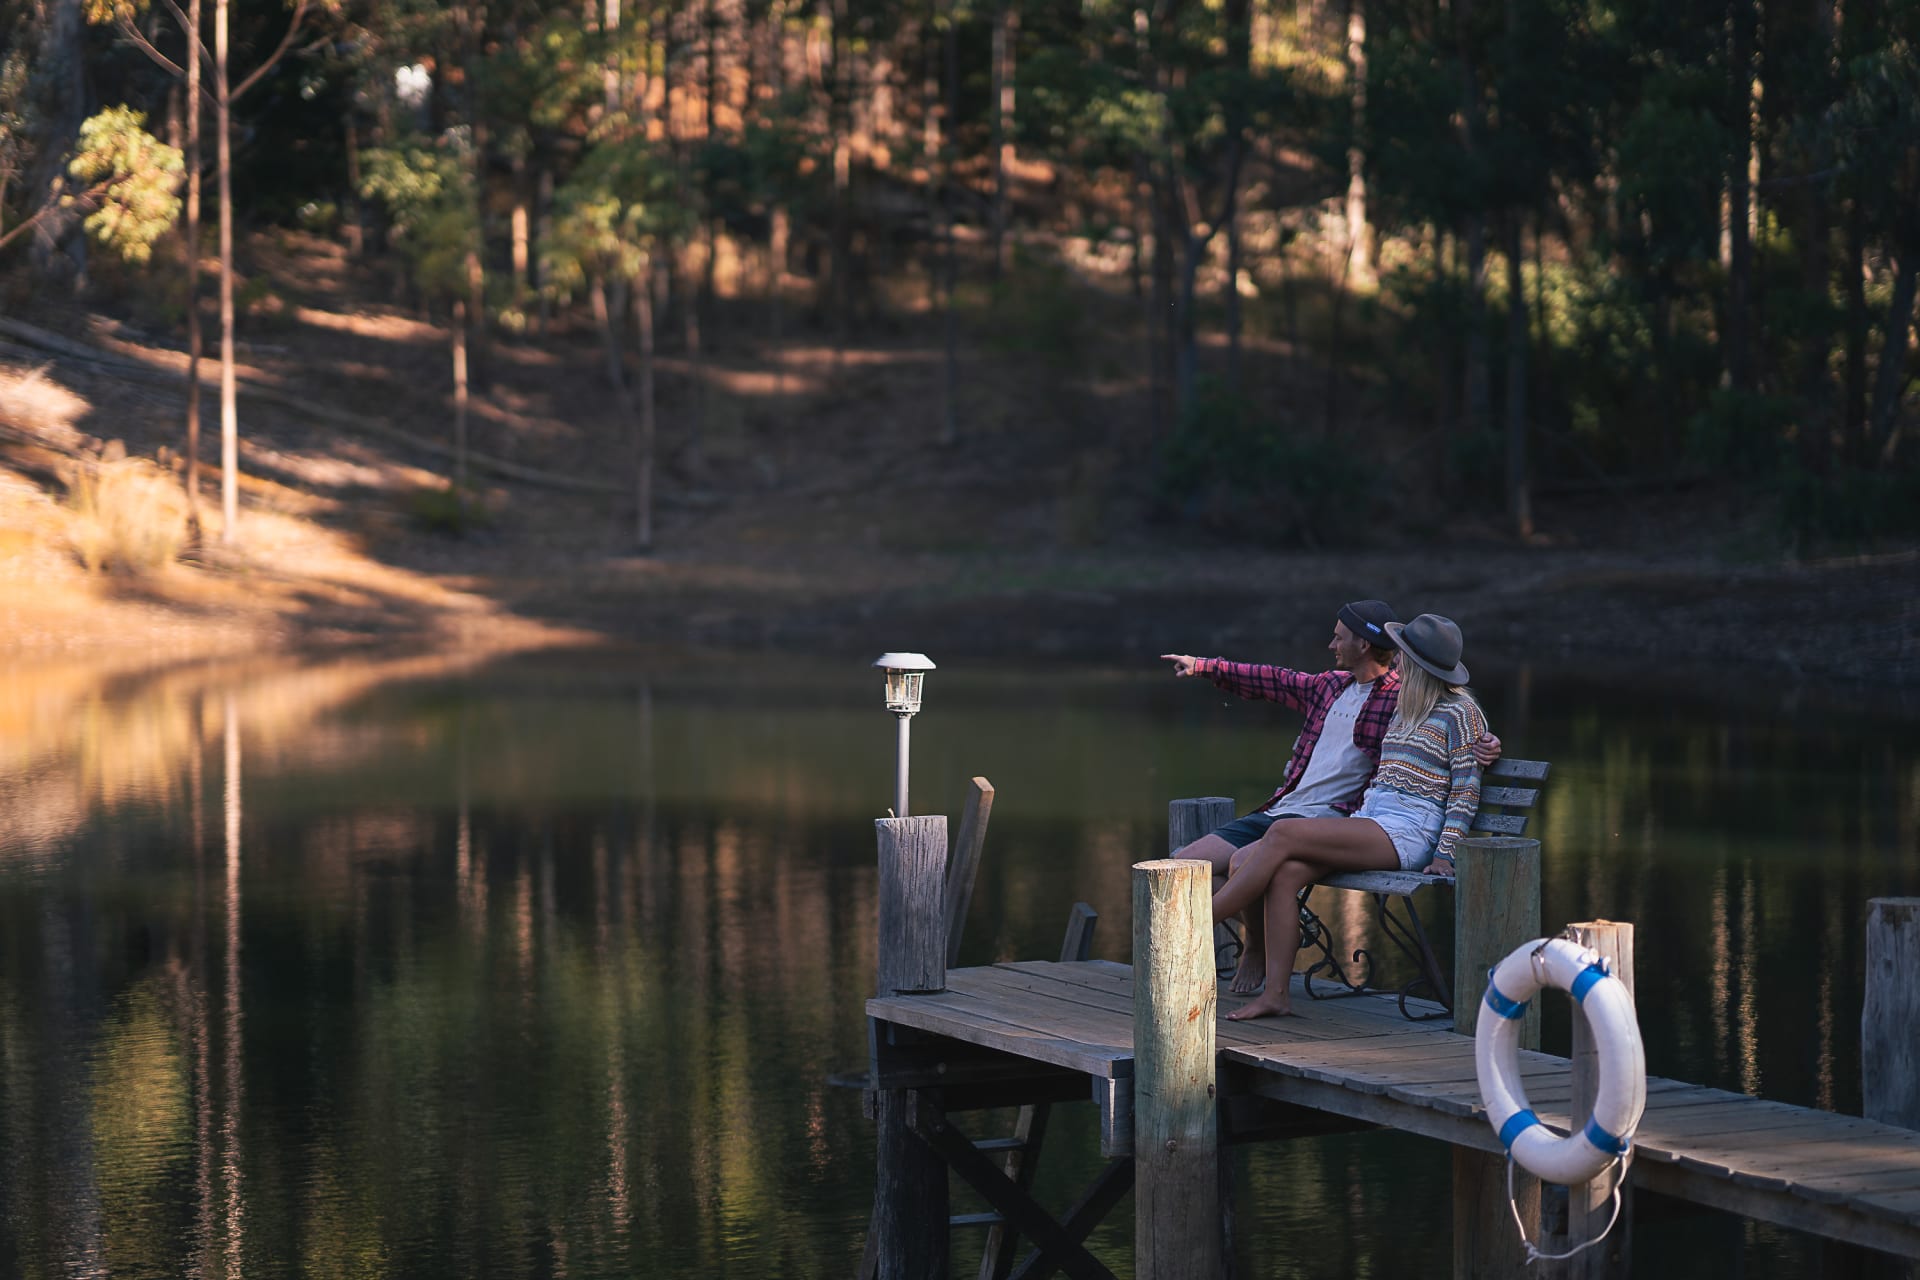 Two campers sat at the end of the jetty, watching the wildlife and relaxing by the dam.